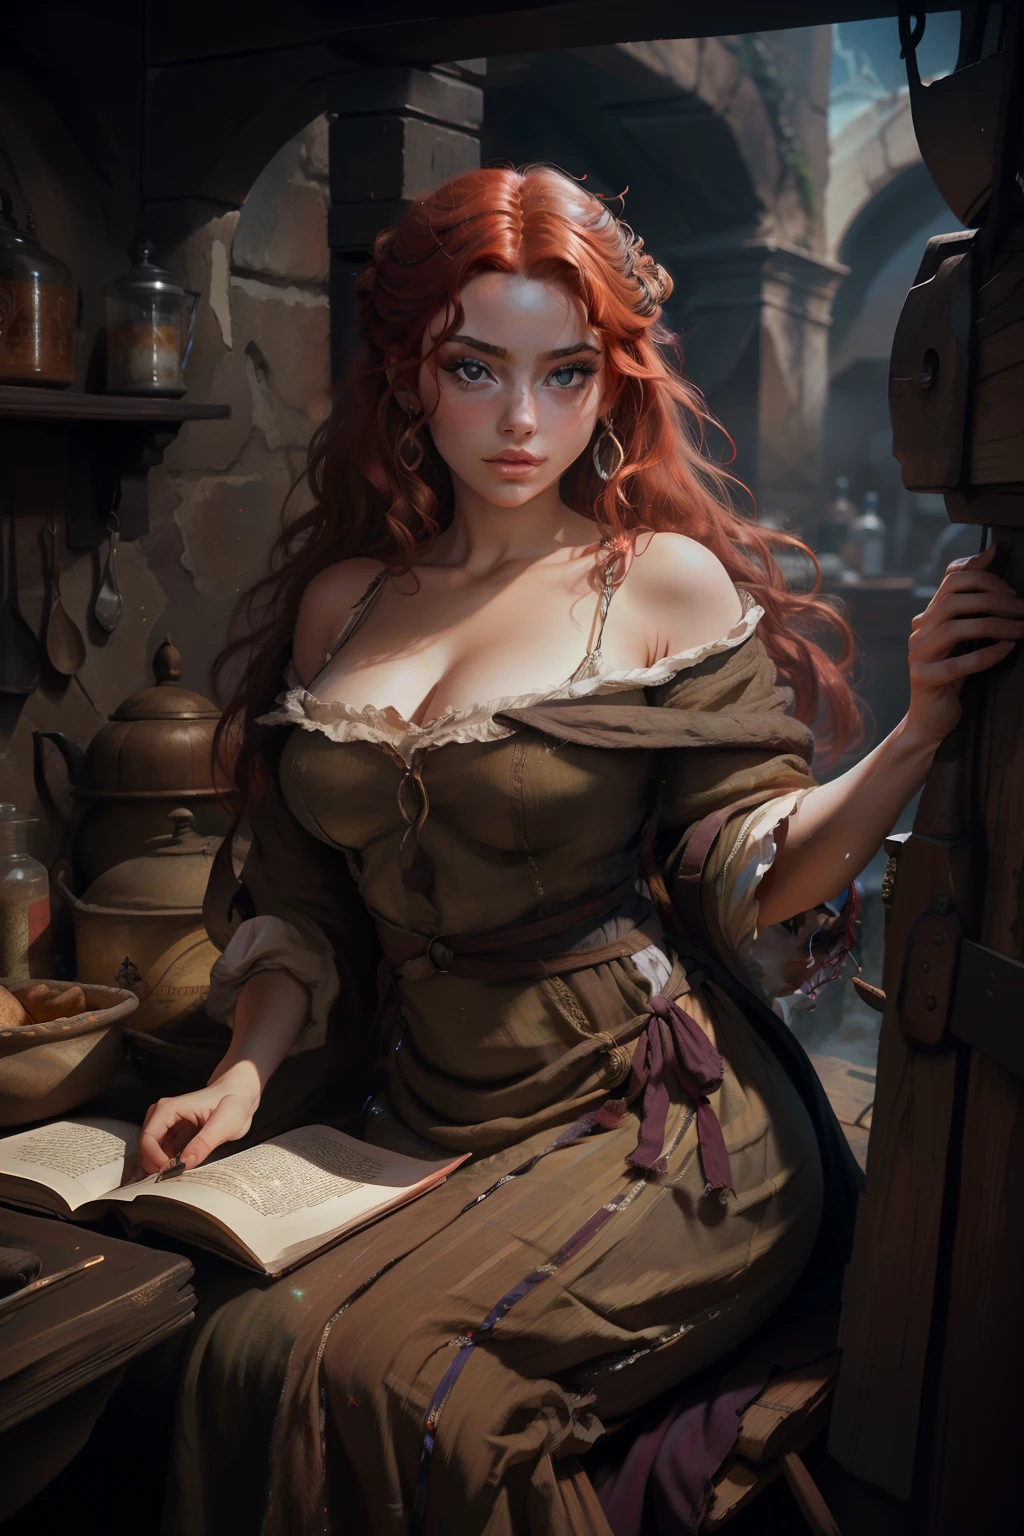 pintura de uma mulher com cabelo vermelho e um estrangulamento em um black gown, John Collier art style, maiden with copper hair, style of karol bak, uma jovem redheadwear, portrait of a young witch, No Bowater Art Style, Directed by: Roberto Lenkiewicz, brom gerald, Albert Lynch, portrait of princess merida, Dave Sim, Red-haired girl in a shadowy palace, black gown e roxo de veludo usando um kokoshnic, luxury gypsy clothing, head adornment, Lace choker, Masterpiece artwork, highest quallity, (standing alone), (face perfect: 1.3), (high détail: 1.2), Dramatic, 1girl, angel, (pale skinned), long redhead hair, Red hair escuros, (Breasts huge), light eyebrows, long hair, natta, purple and black medieval gypspy outfit, lots of jewelry, head adornments, eyes browns, covered navel, pouty lips, Curvilinear, (arms behind back: 1.4), inked, Detailed palace background, art by artgerm and greg rutkowski, cinematic lighthing, , lo fashion, BALENCIAGA, Alexandre Mc Queen, glitter, Red hair acobreados, copper red hair, Red hair, mulher redheadwear, Red hair bonitos, redheadwear, pale skinned, fat bottle, large lips, juicy lips beautiful lips, Beautiful  eyes, chubby cheeks, Round face, young chubby, Chubby Teen, chub,  gorda, Woman with plump body, chubby woman, black gown, gloomy dress